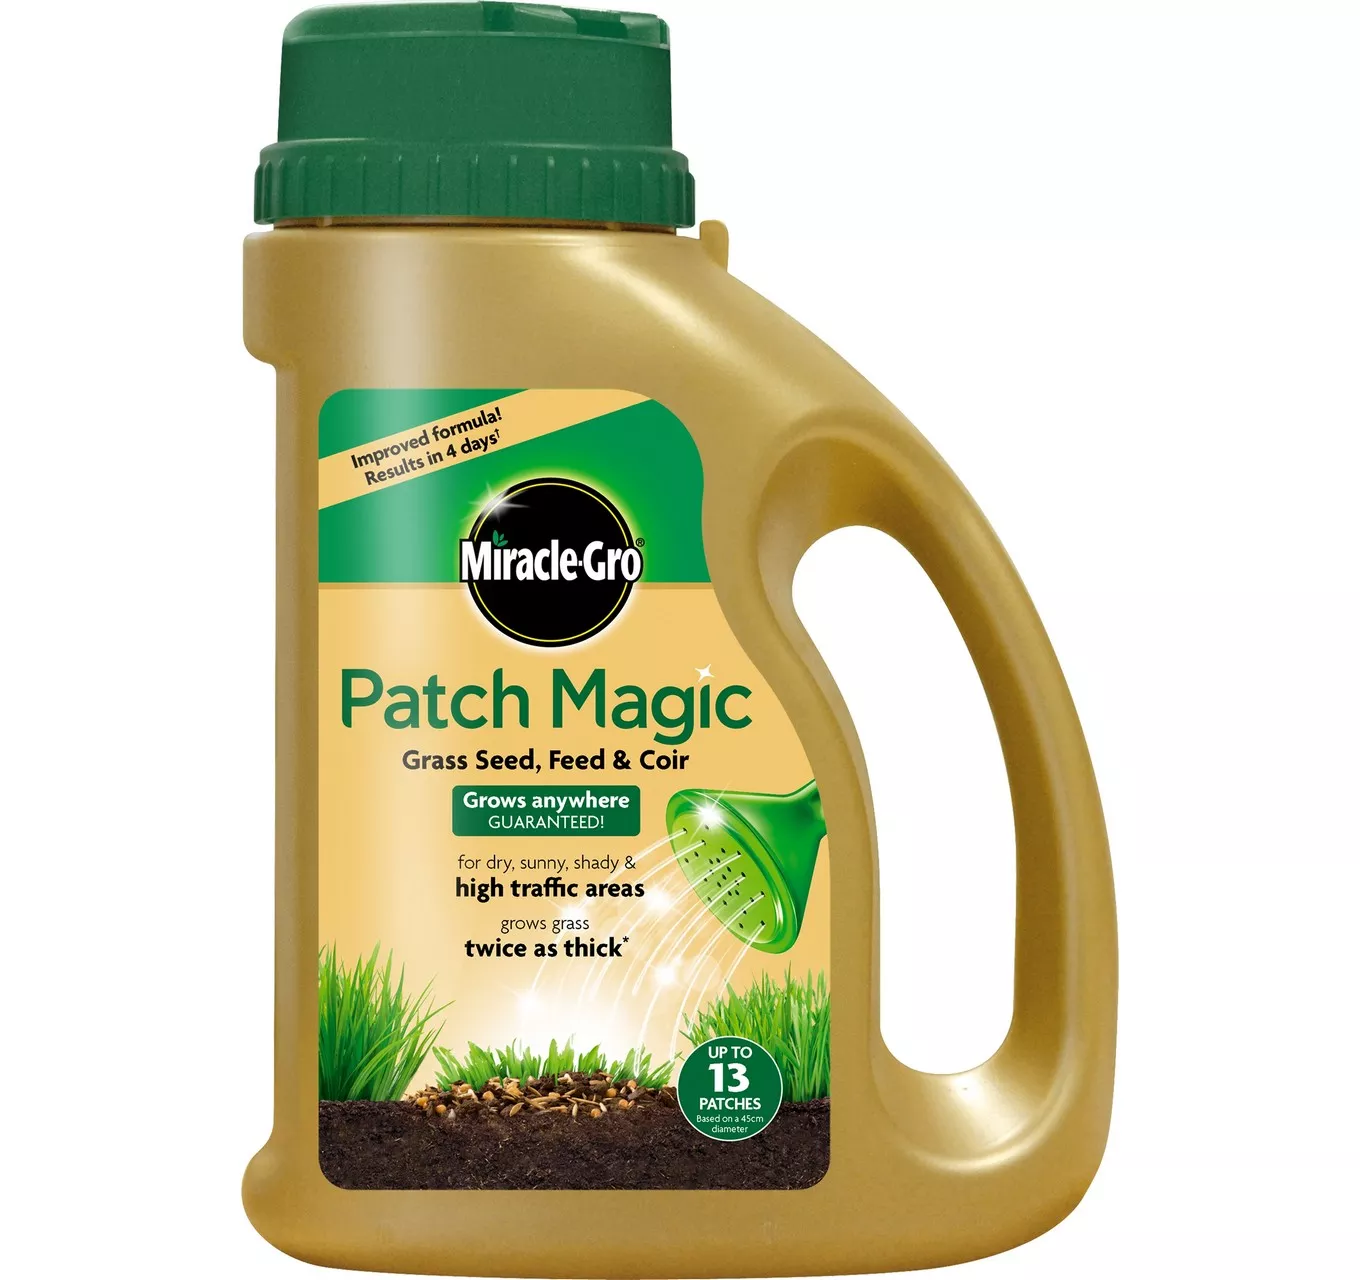 Patch Magic Grass Seed 1015g